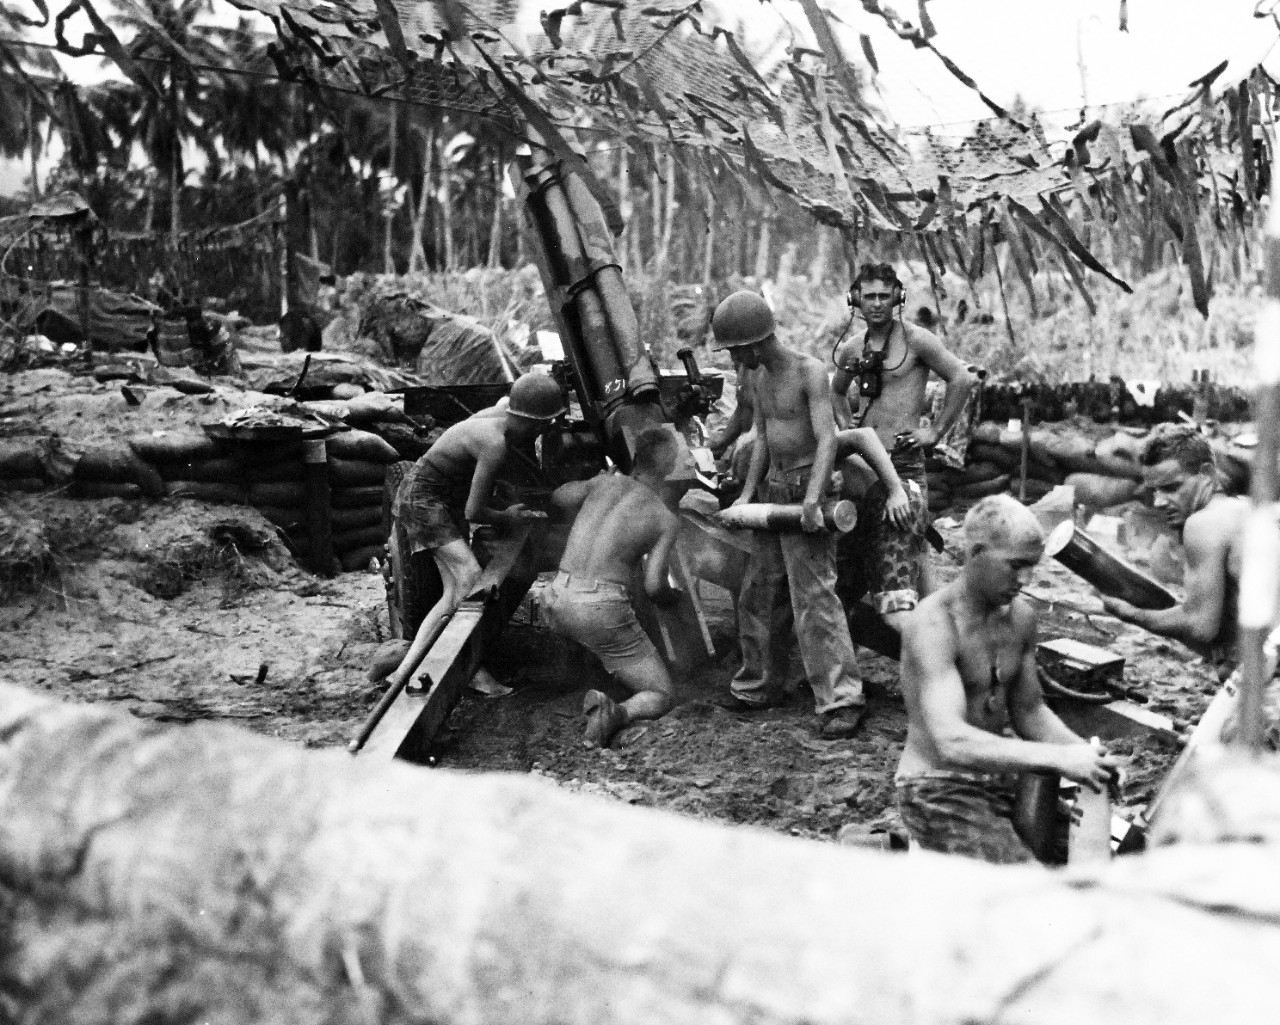 80-G-205283:  Bougainville Campaign, November 1943-August 1945.A U.S. Marine 105mm howitzer gun crew blasts the Japanese enemy paving the way for an infantry advance at Bougainville.  Members of the crew are left to right:  Corporal Marshall E. Farr; Private First Class Finis O. Triplett; Private First Class Donald R. Stewart; Sergeant Woodroe W. Bodine; Private First Class Glenn E. Will and Private First Class Wayne E. Rockwell.  Photograph released December 29, 1943.   Official U.S. Navy Photograph, now in the collections of the National Archives.    (2015/7/14).